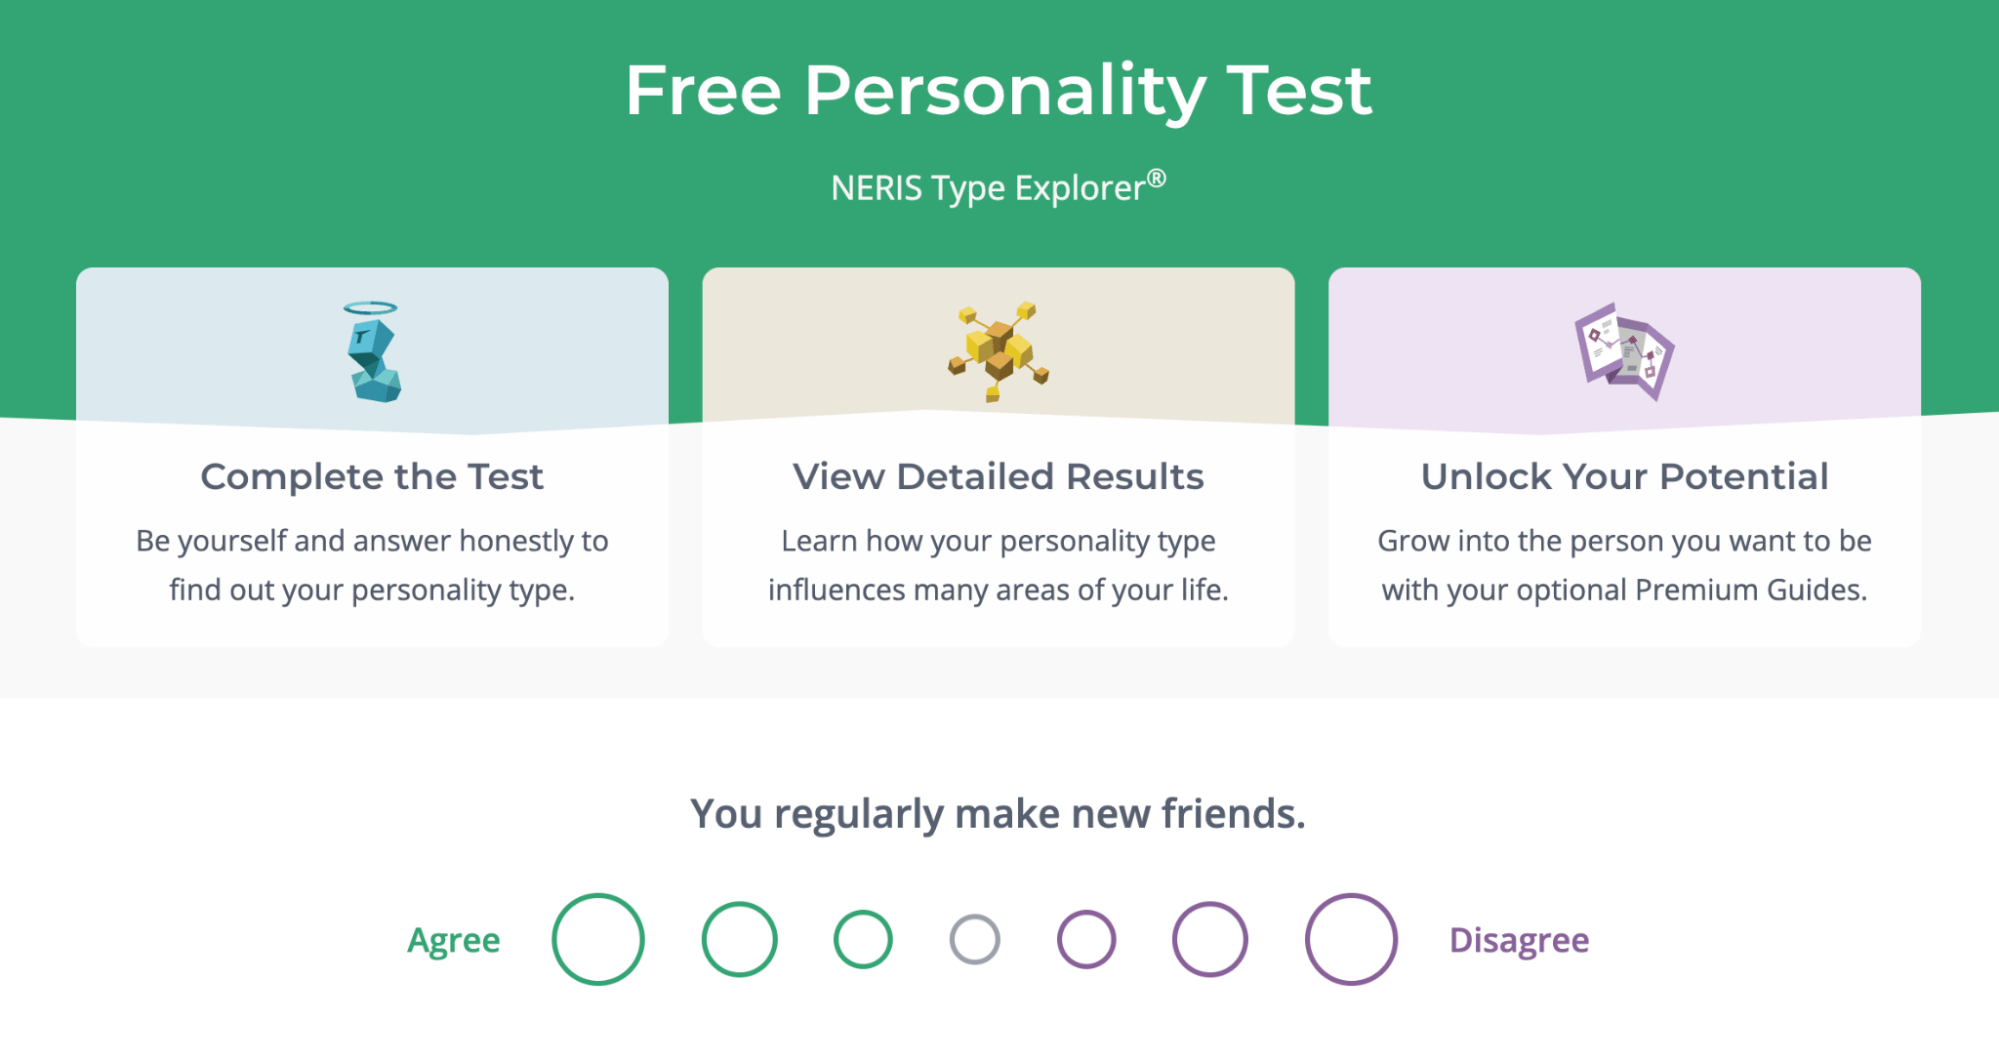 16Personalities’ Free Personality Test 